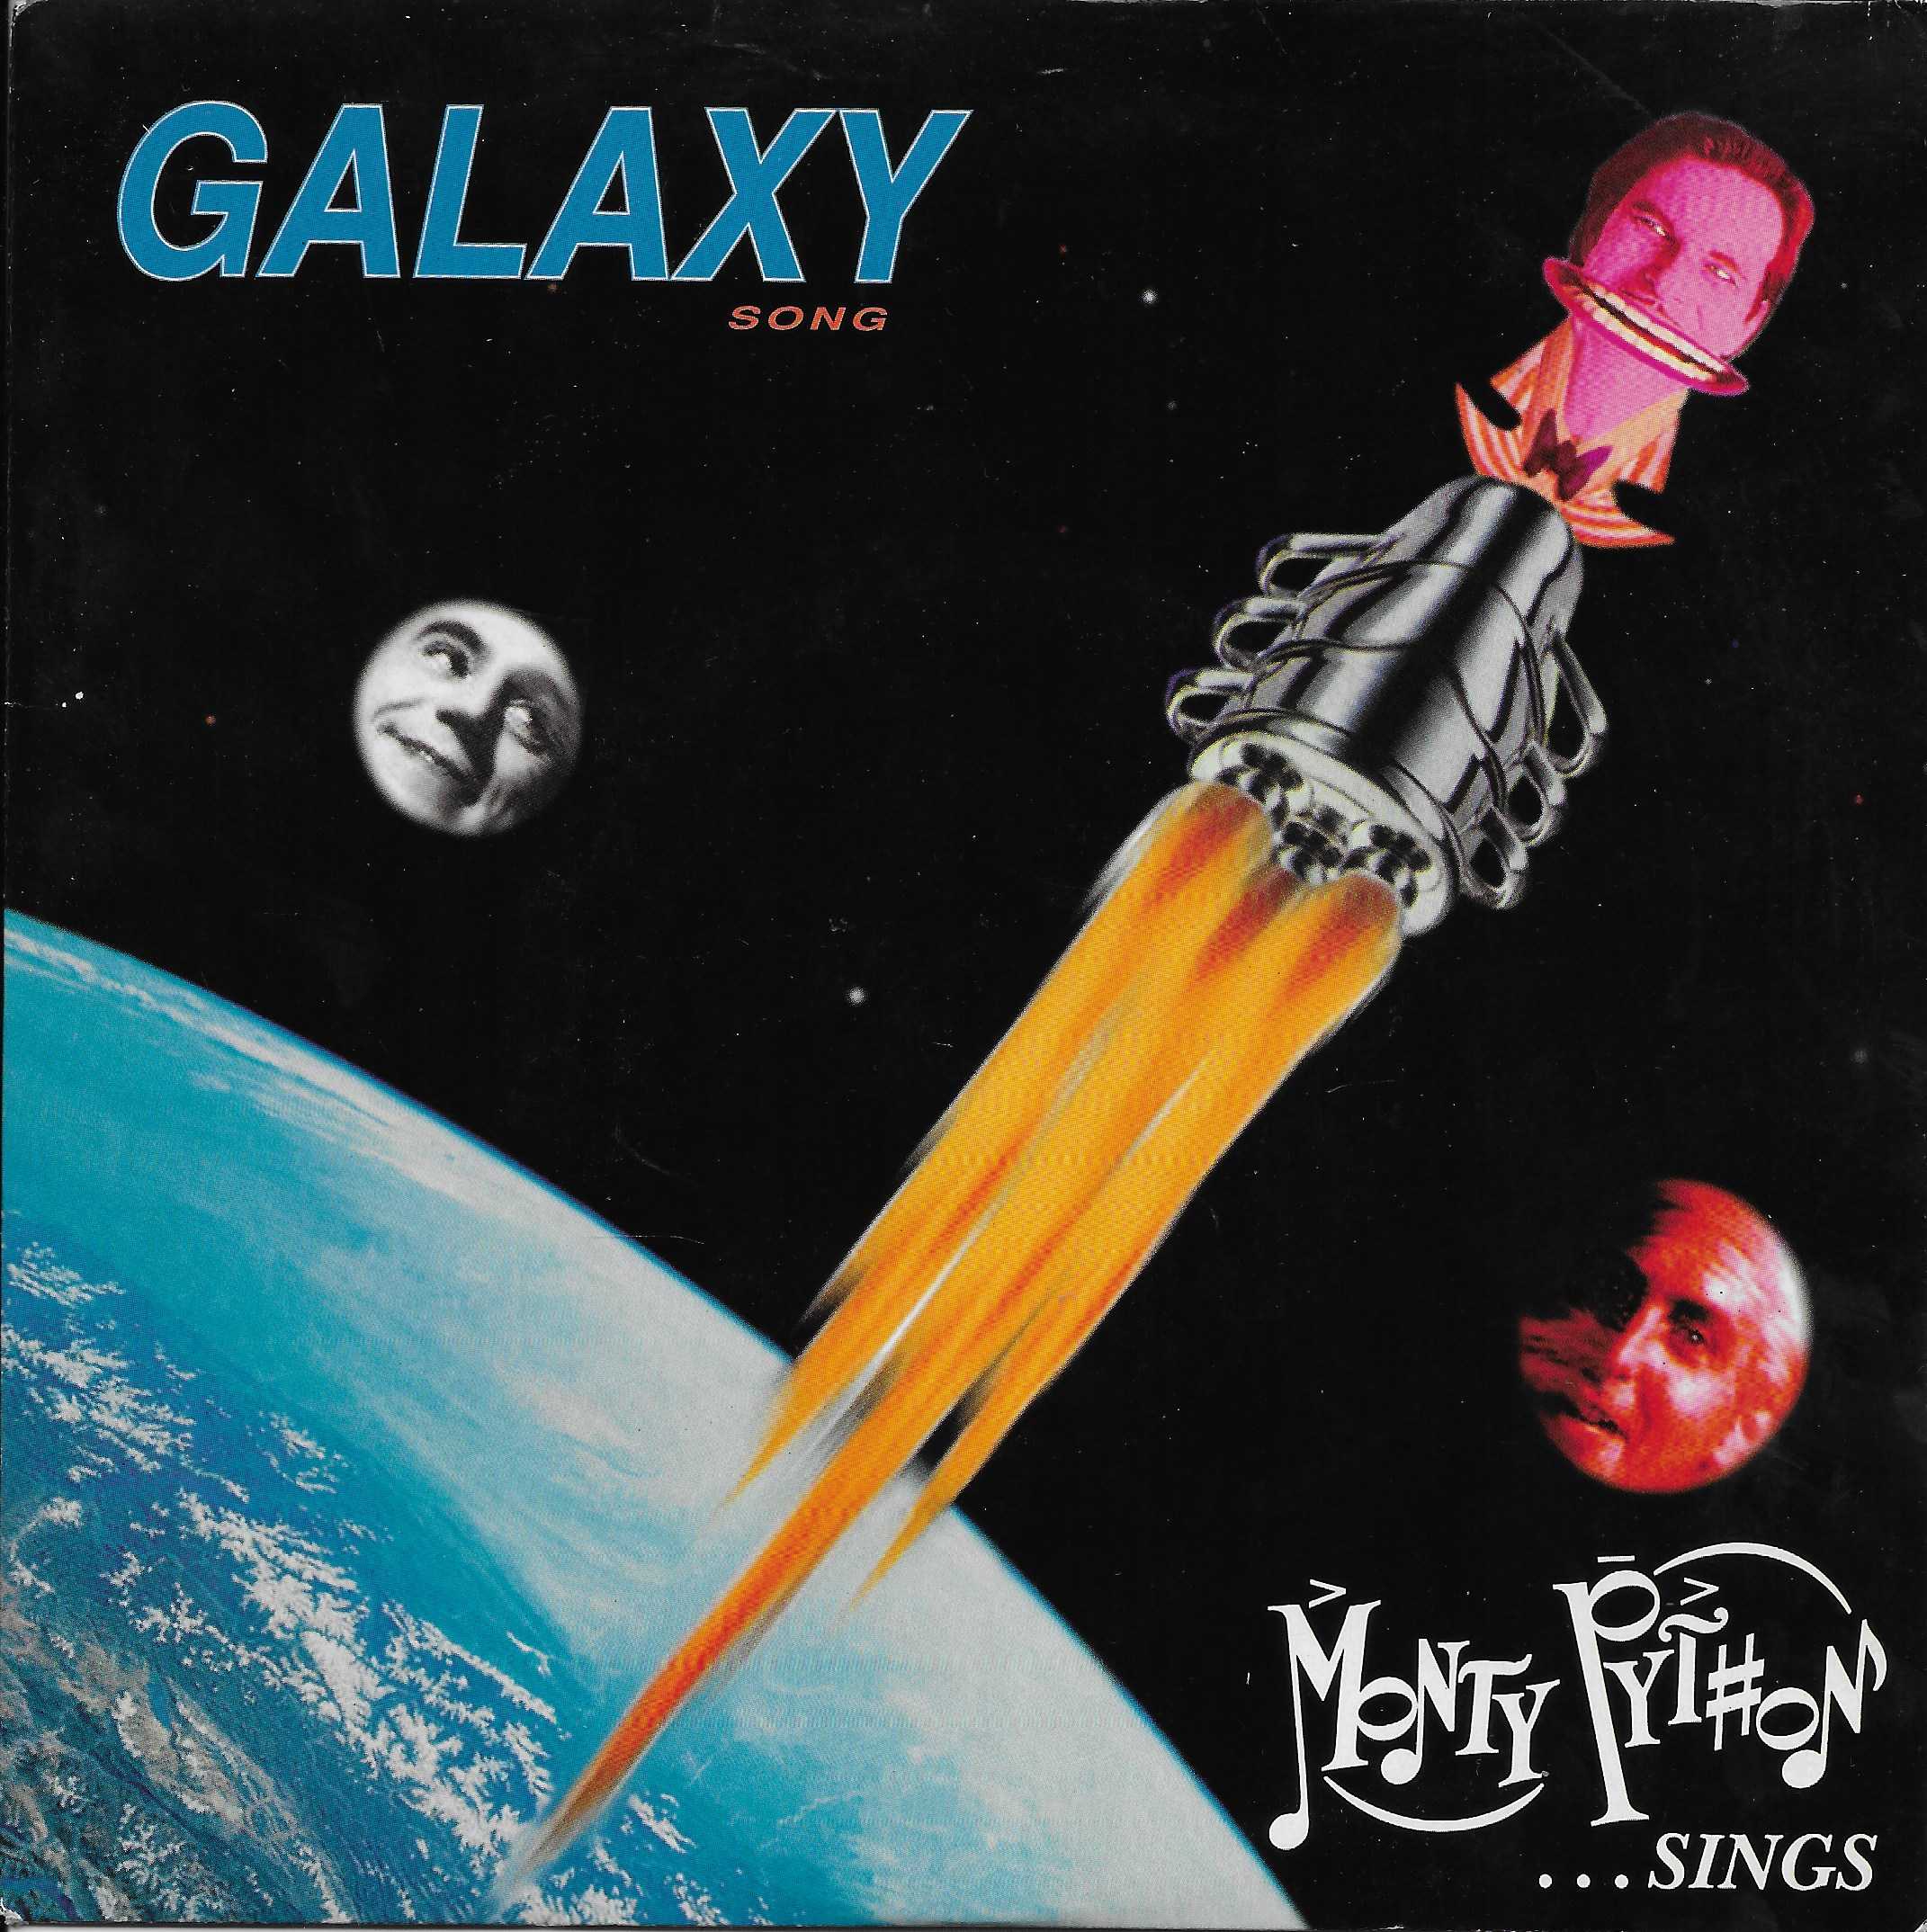 Picture of Galaxy song (Monty Python's flying circus) by artist Monty Python from the BBC singles - Records and Tapes library